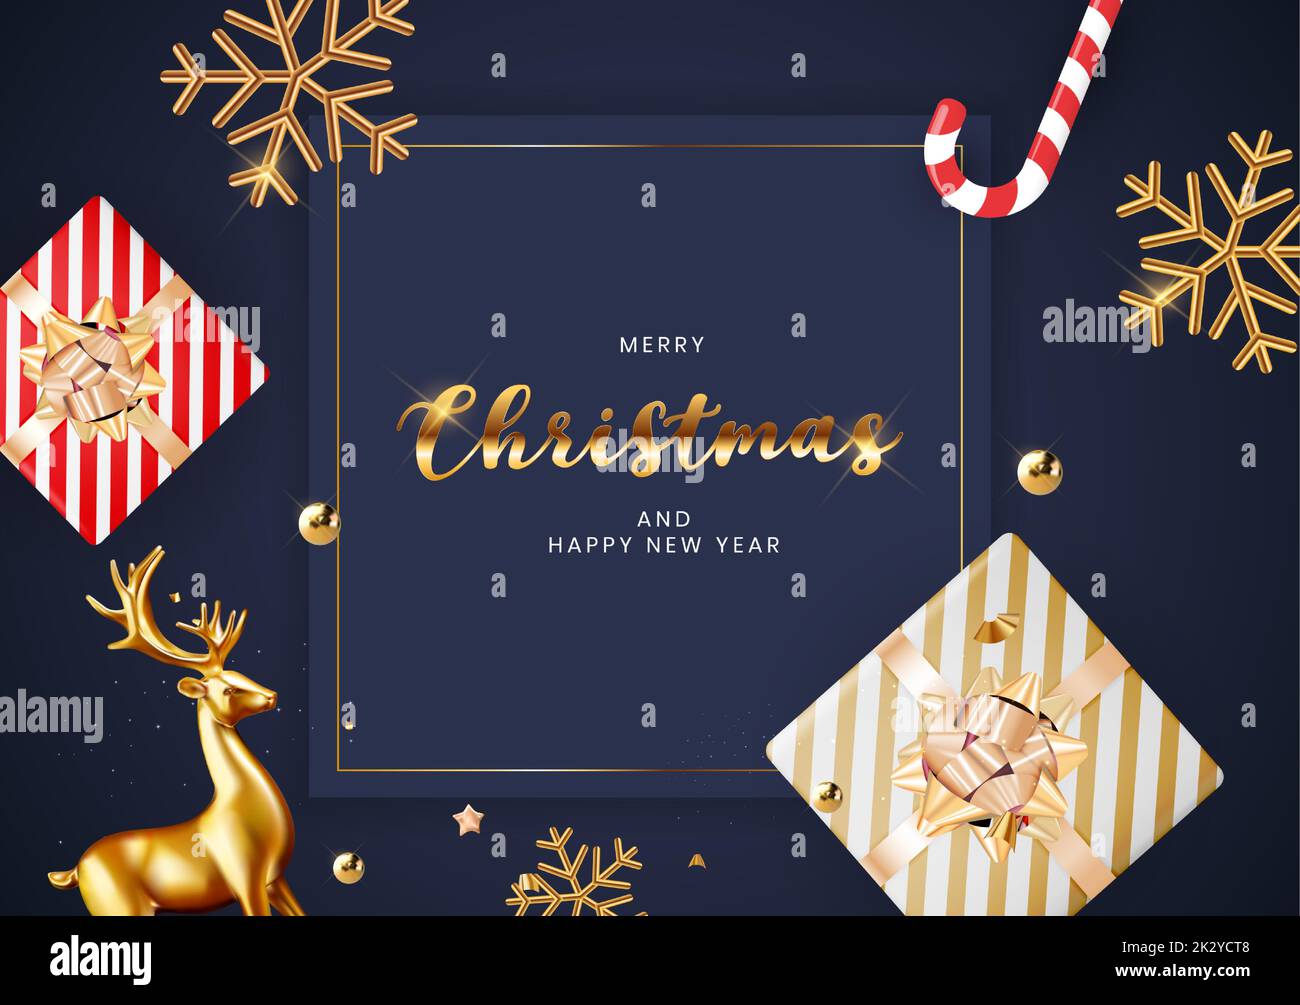 Greeting Card Merry Christmas and Happy New Year. Vector Illustration Stock Vector